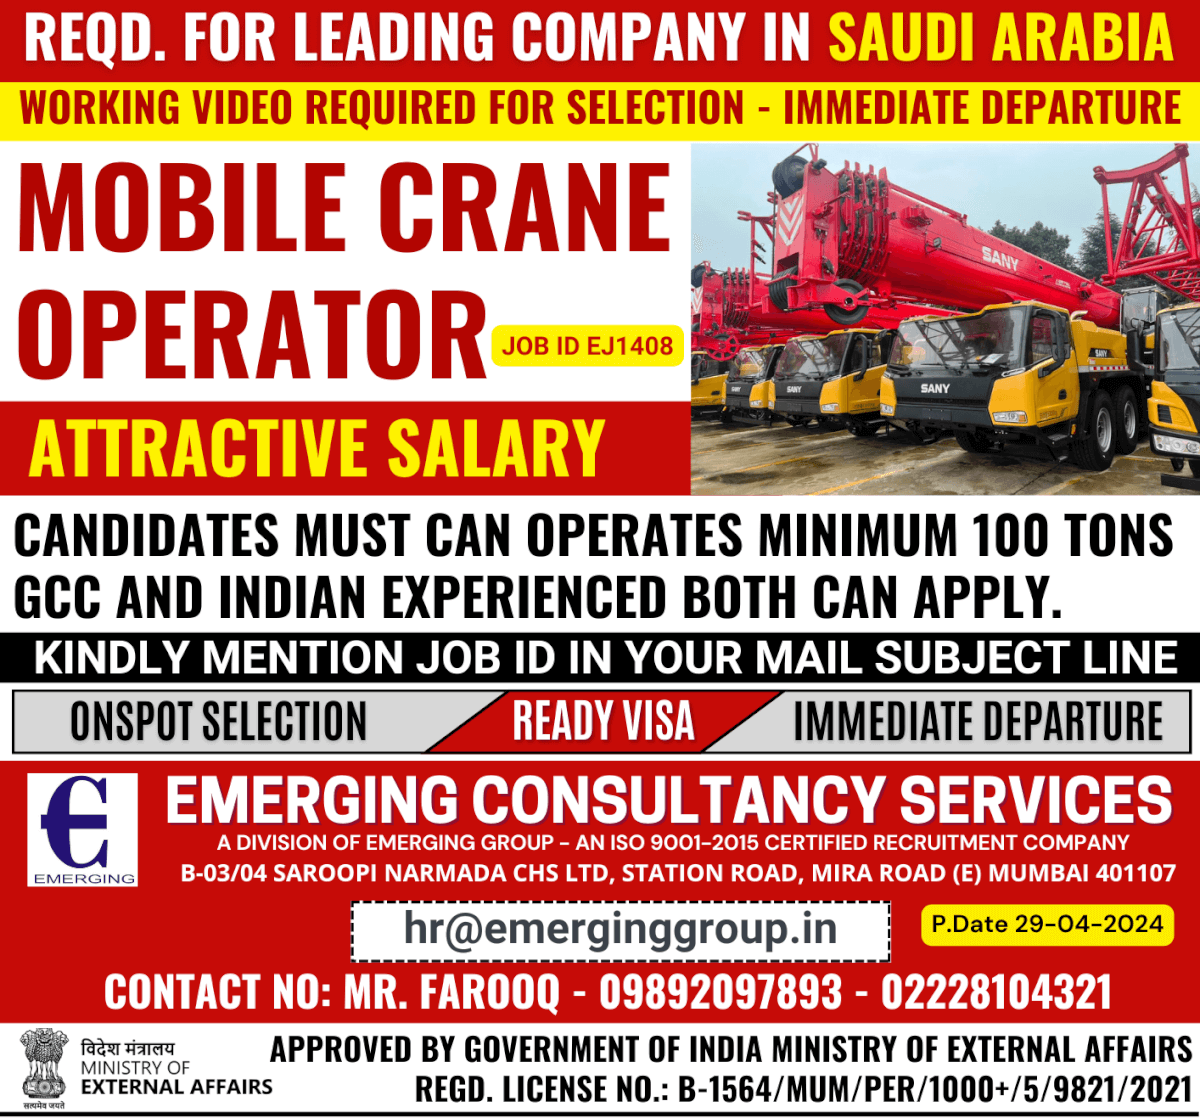 URGENTLY REQUIRED FOR LEADING COMPANY IN SAUDI ARABIA